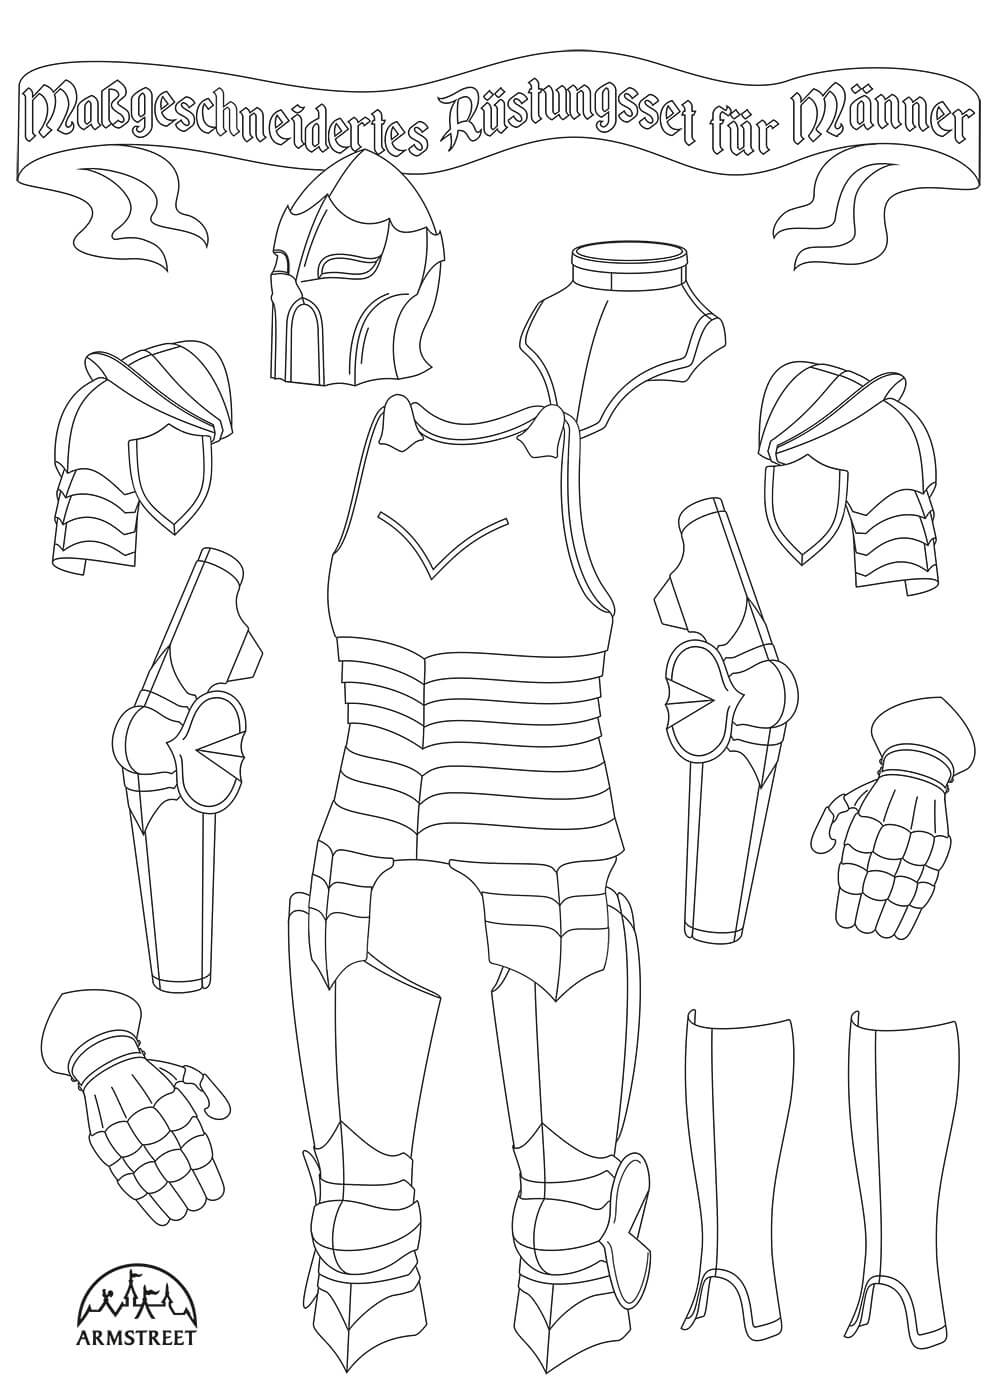 Full male armour template